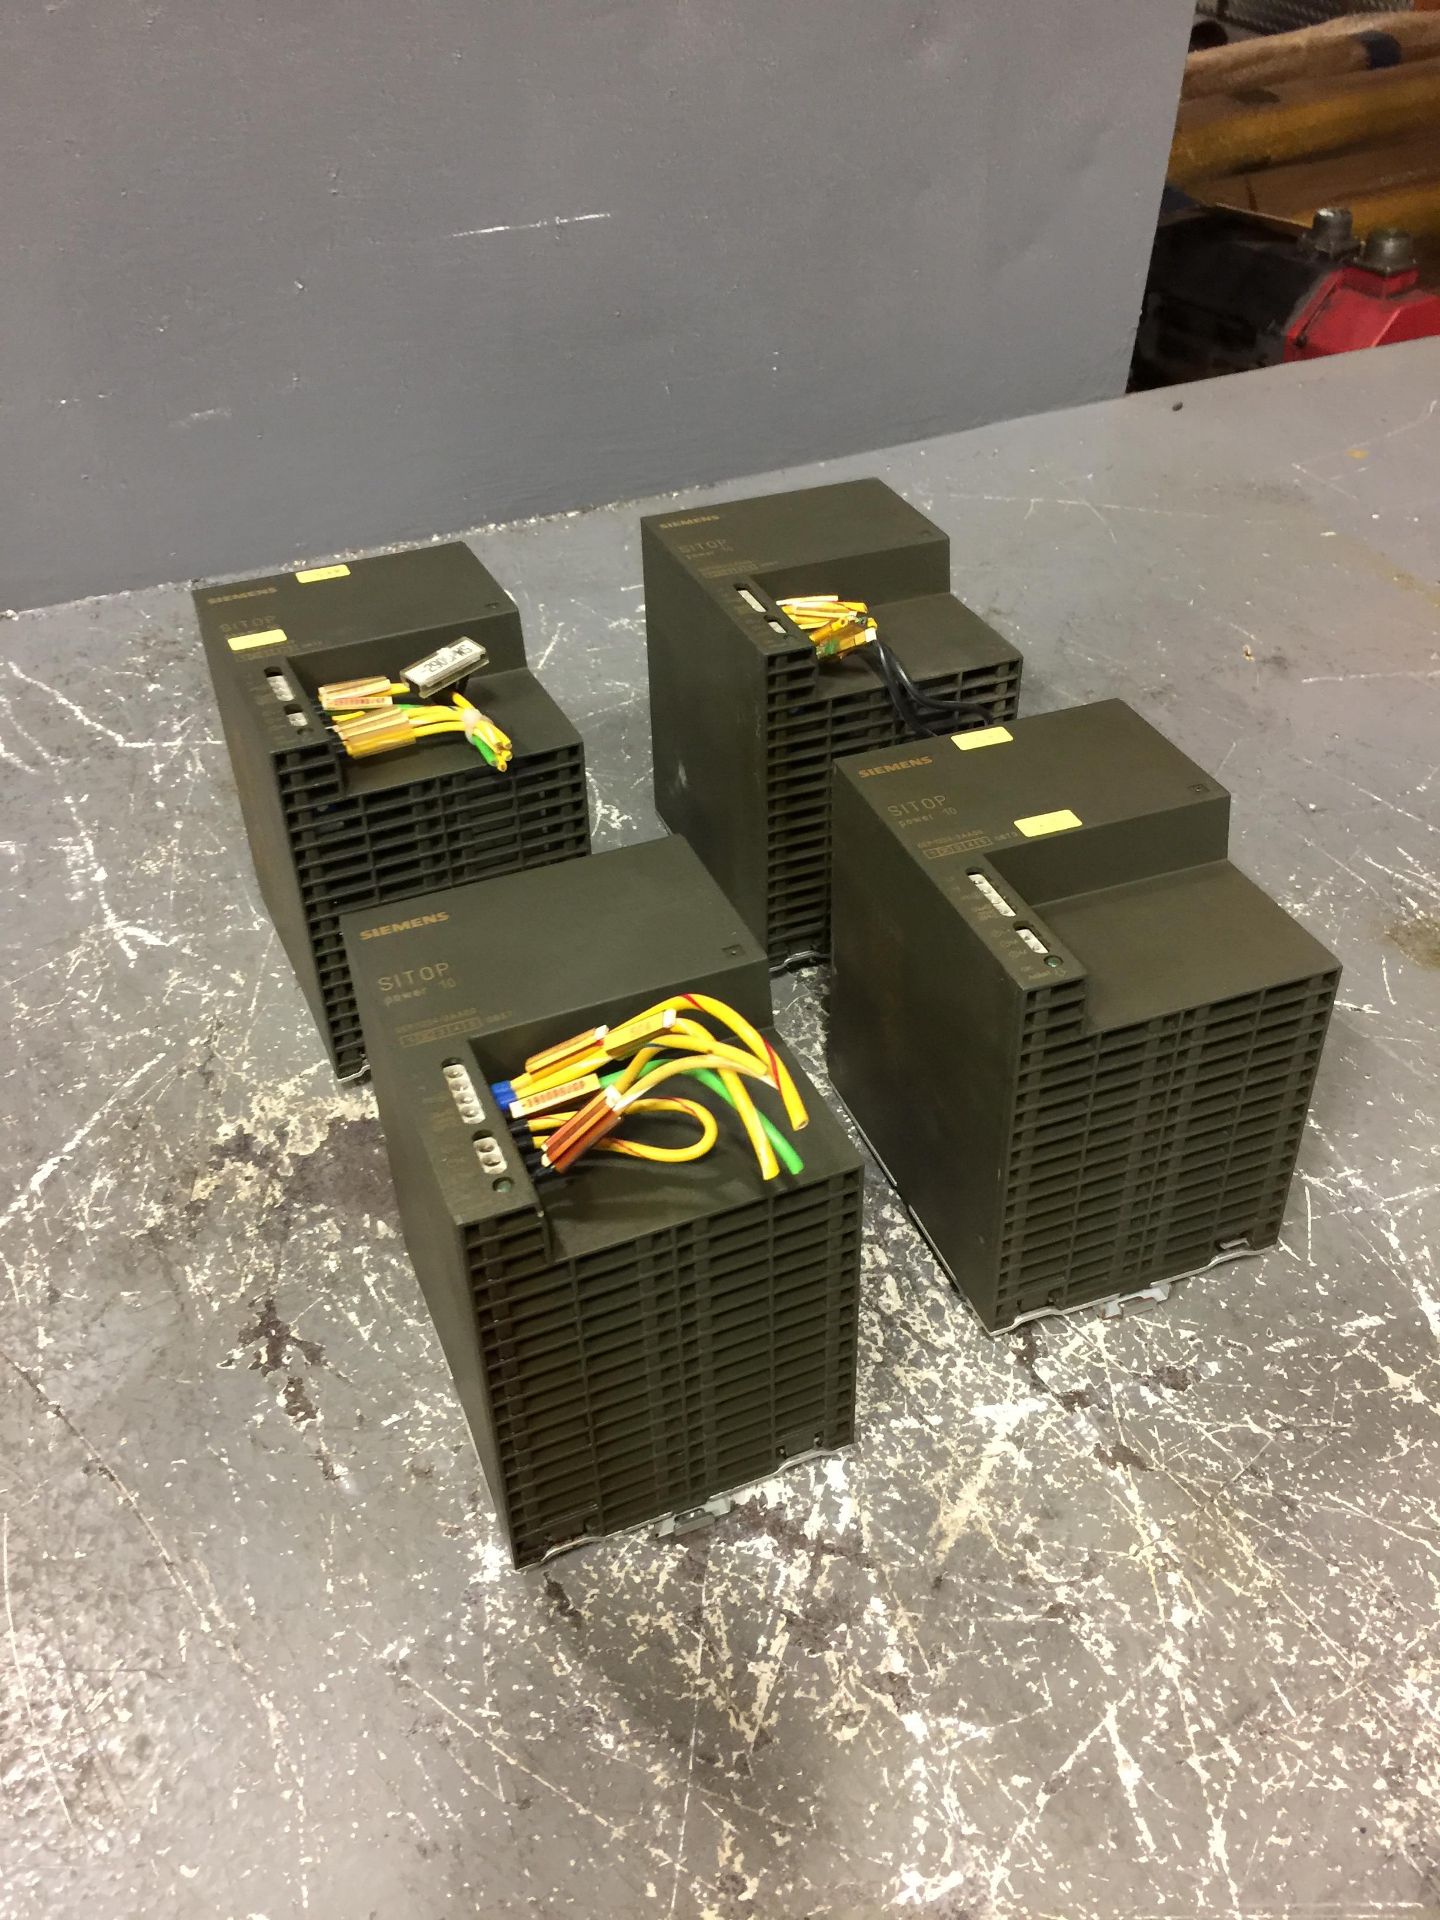 (4) - SIEMENS 6EP1 334-2AA00 SITOP POWER 10_POWER SUPPLY - Image 2 of 3